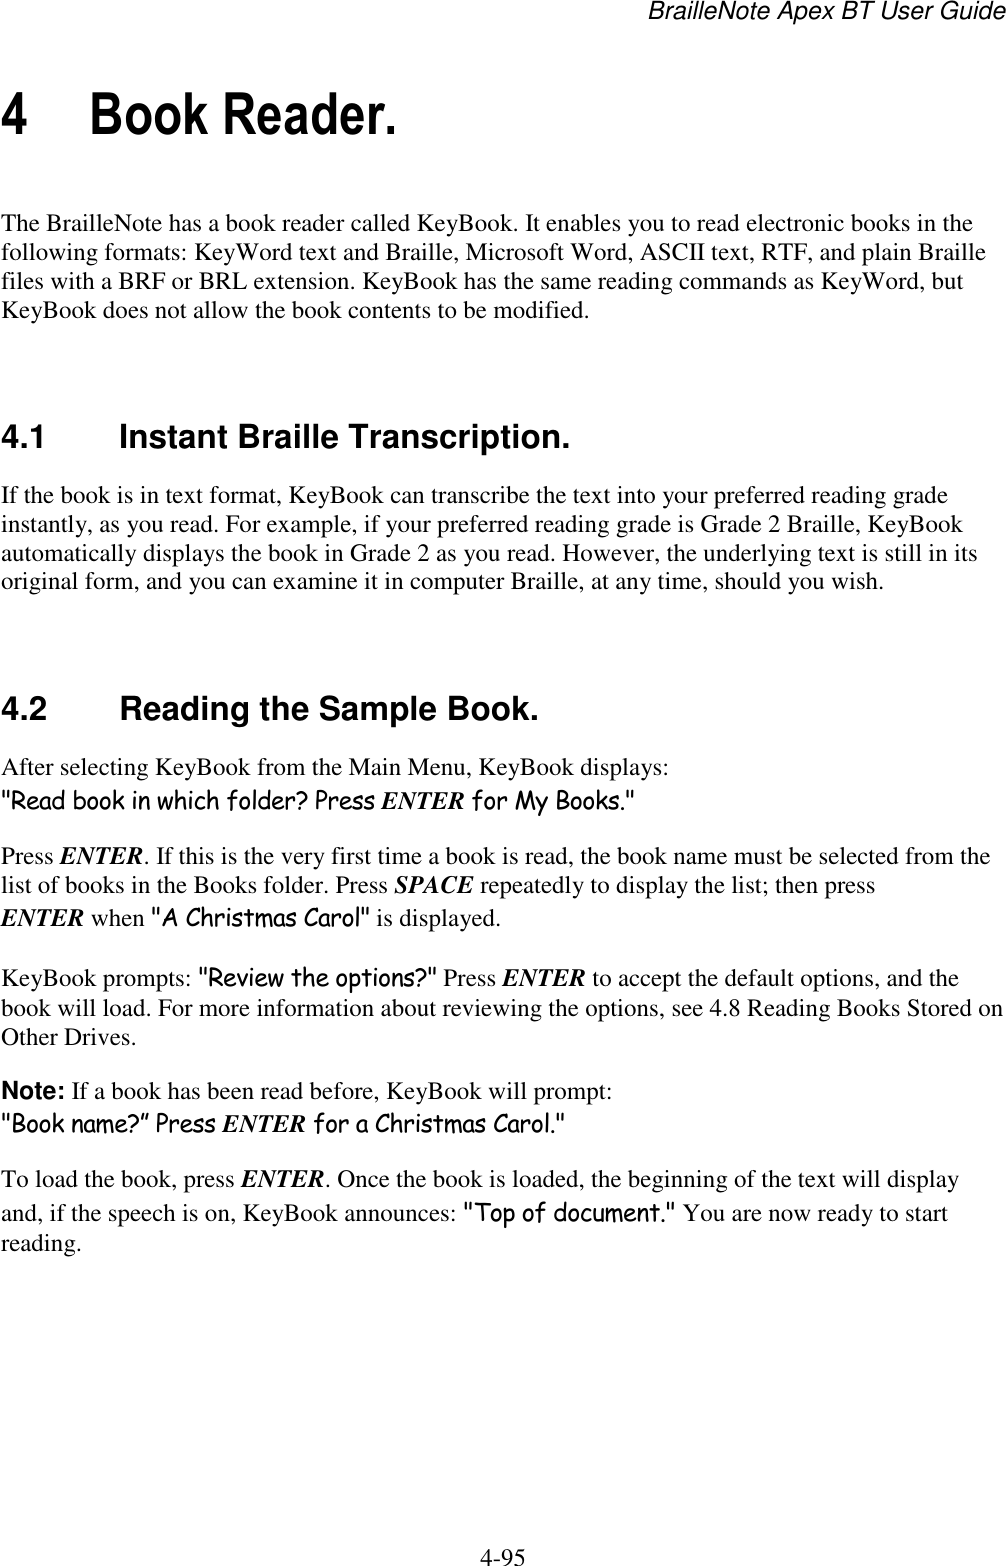 BrailleNote Apex BT User Guide   4-95   4 Book Reader. The BrailleNote has a book reader called KeyBook. It enables you to read electronic books in the following formats: KeyWord text and Braille, Microsoft Word, ASCII text, RTF, and plain Braille files with a BRF or BRL extension. KeyBook has the same reading commands as KeyWord, but KeyBook does not allow the book contents to be modified.   4.1  Instant Braille Transcription. If the book is in text format, KeyBook can transcribe the text into your preferred reading grade instantly, as you read. For example, if your preferred reading grade is Grade 2 Braille, KeyBook automatically displays the book in Grade 2 as you read. However, the underlying text is still in its original form, and you can examine it in computer Braille, at any time, should you wish.   4.2  Reading the Sample Book. After selecting KeyBook from the Main Menu, KeyBook displays: &quot;Read book in which folder? Press ENTER for My Books.&quot; Press ENTER. If this is the very first time a book is read, the book name must be selected from the list of books in the Books folder. Press SPACE repeatedly to display the list; then press ENTER when &quot;A Christmas Carol&quot; is displayed. KeyBook prompts: &quot;Review the options?&quot; Press ENTER to accept the default options, and the book will load. For more information about reviewing the options, see 4.8 Reading Books Stored on Other Drives. Note: If a book has been read before, KeyBook will prompt: &quot;Book name?” Press ENTER for a Christmas Carol.&quot; To load the book, press ENTER. Once the book is loaded, the beginning of the text will display and, if the speech is on, KeyBook announces: &quot;Top of document.&quot; You are now ready to start reading.   